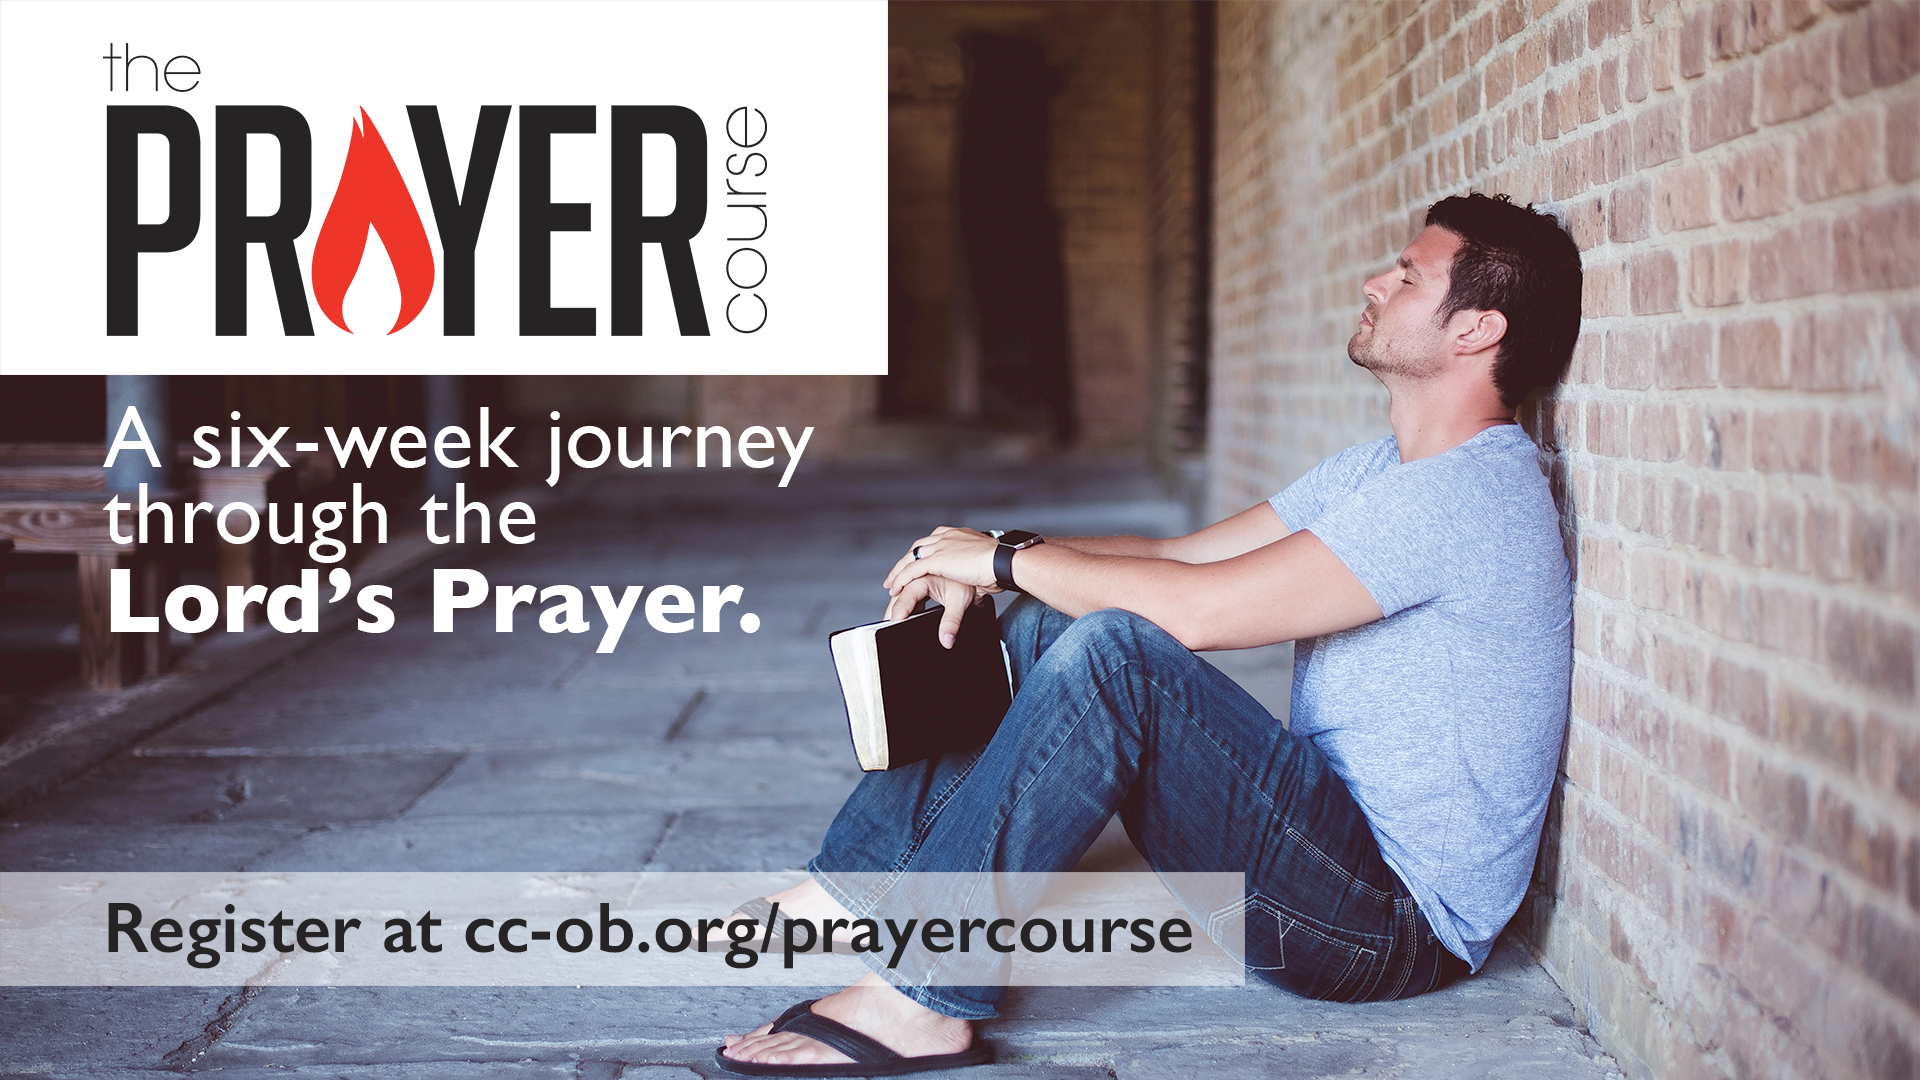 The Prayer Course
Oak Brook and Butterfield (formerly Downers Grove)
